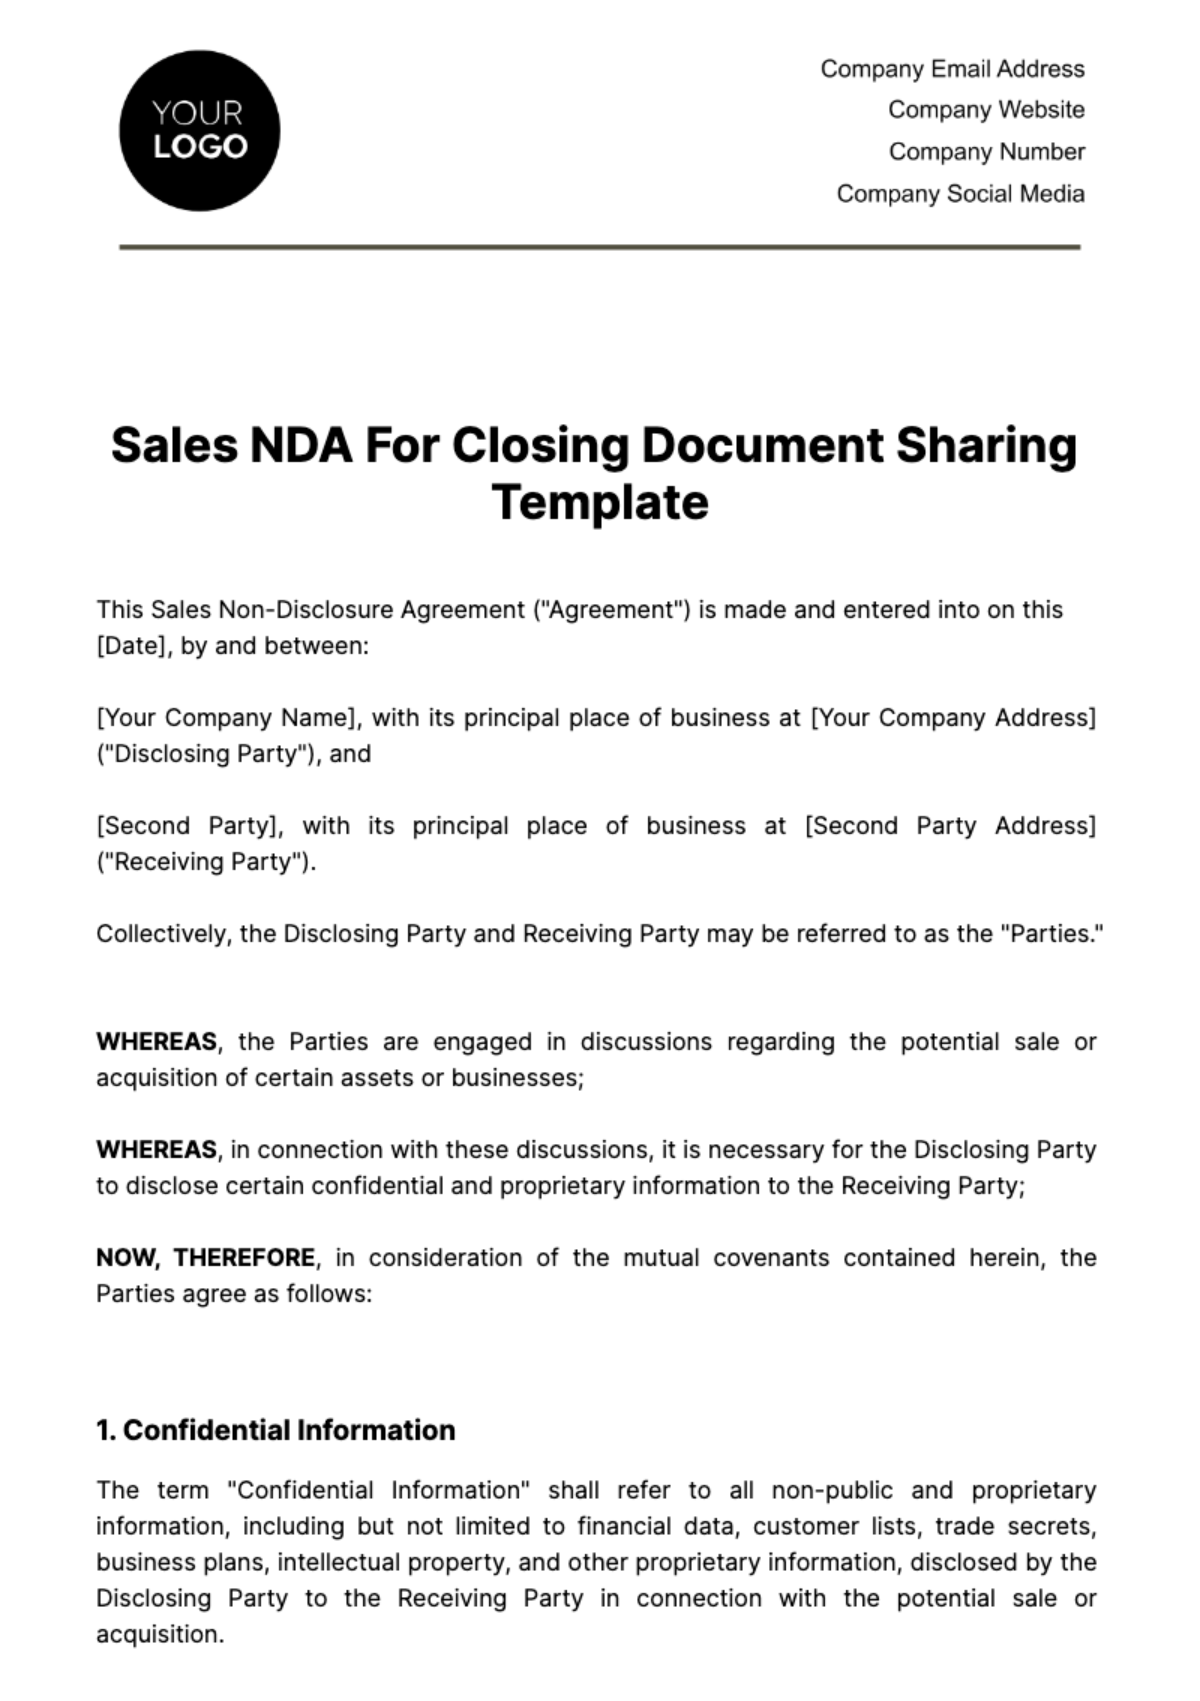 Sales NDA for Closing Document Sharing Template